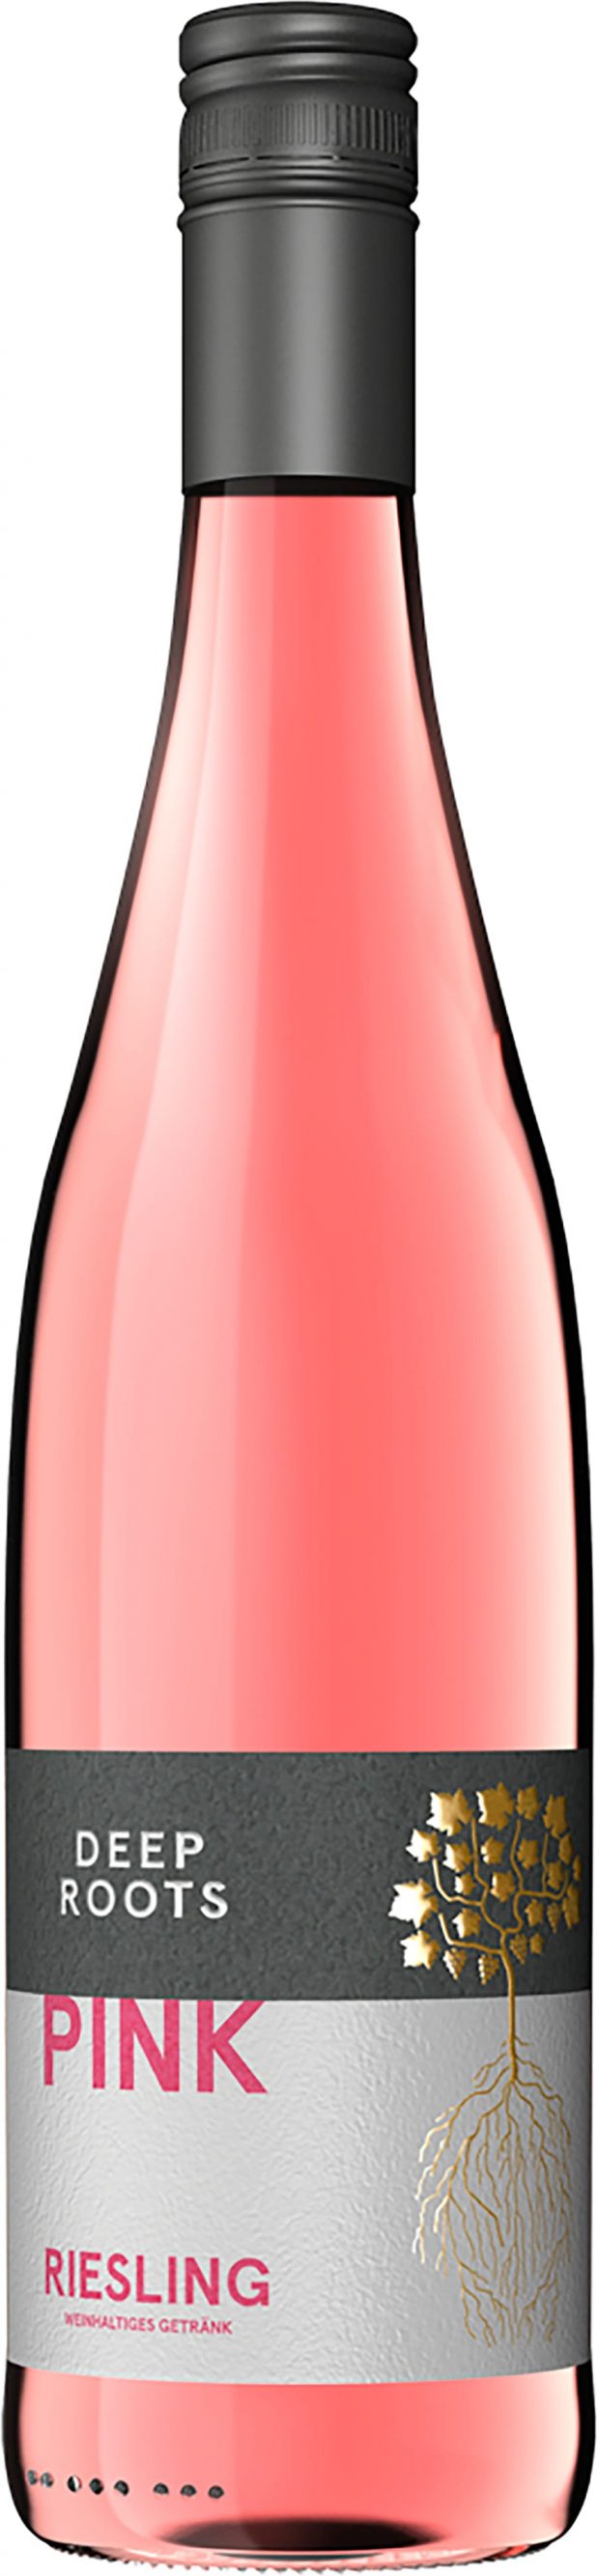 Deep Roots Pink Riesling